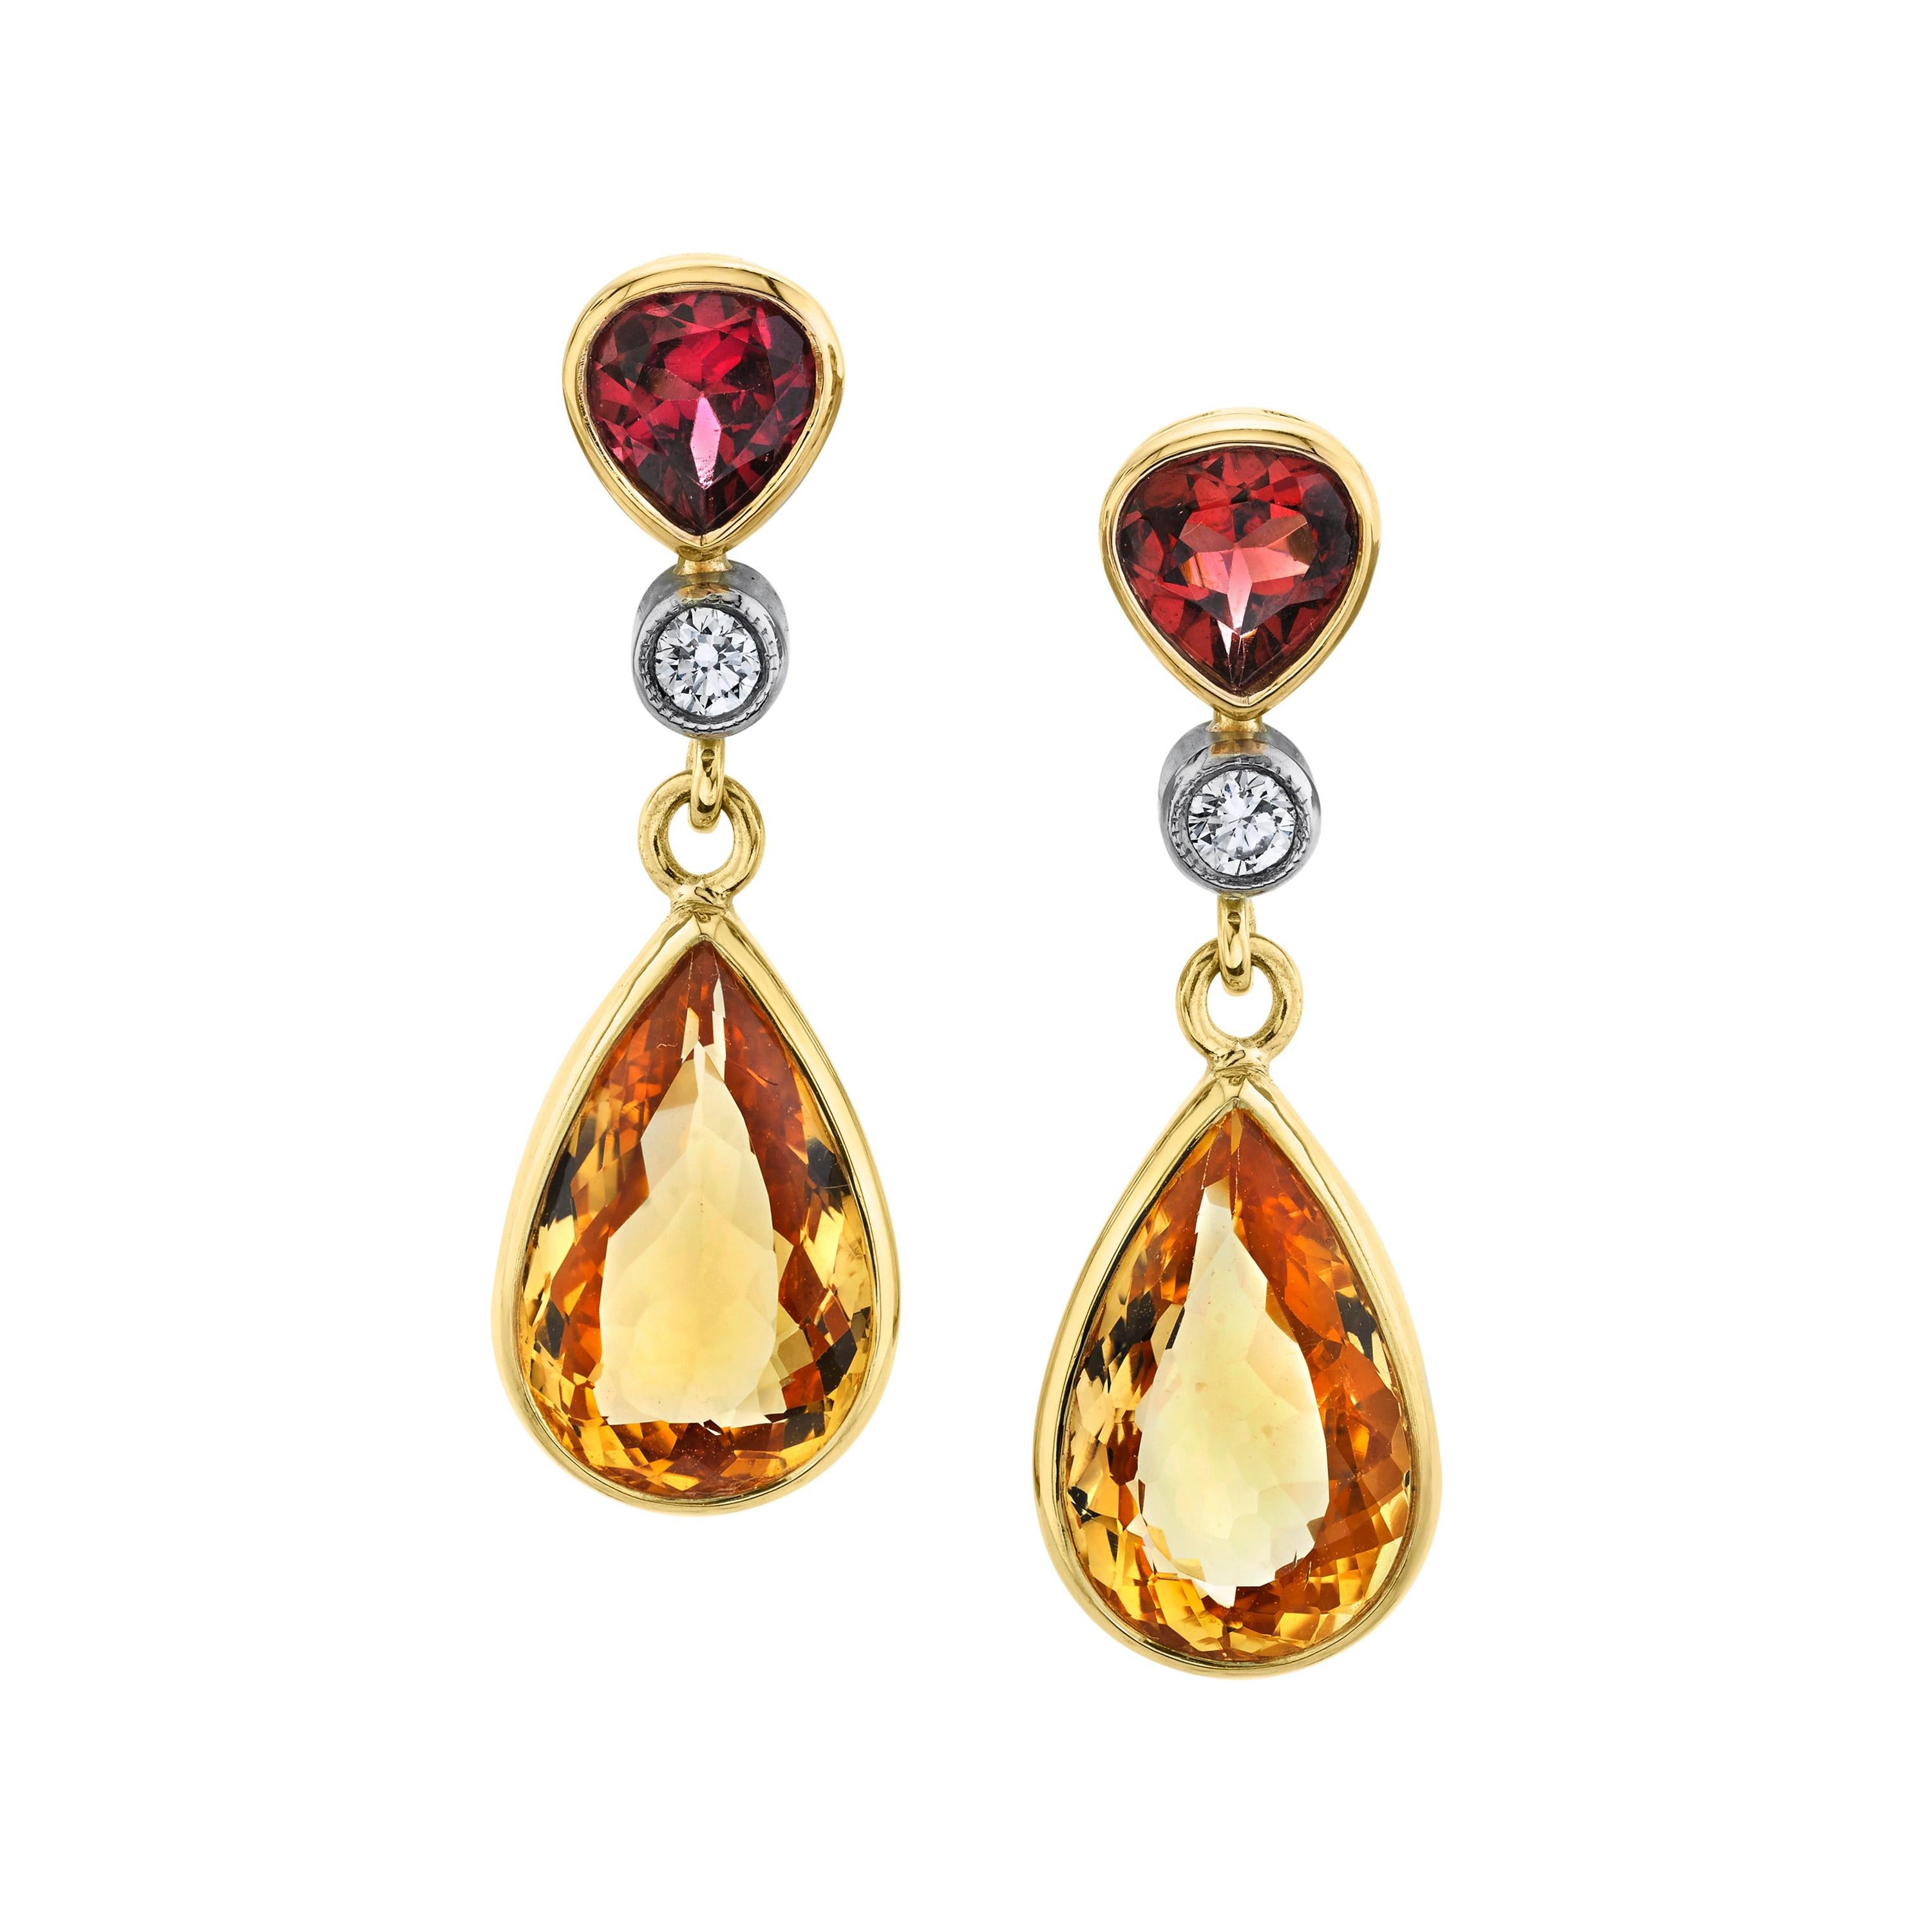 2 Ct Oval & Round Red Garnet Drop/Dangle Earrings 14k Yellow Gold Over